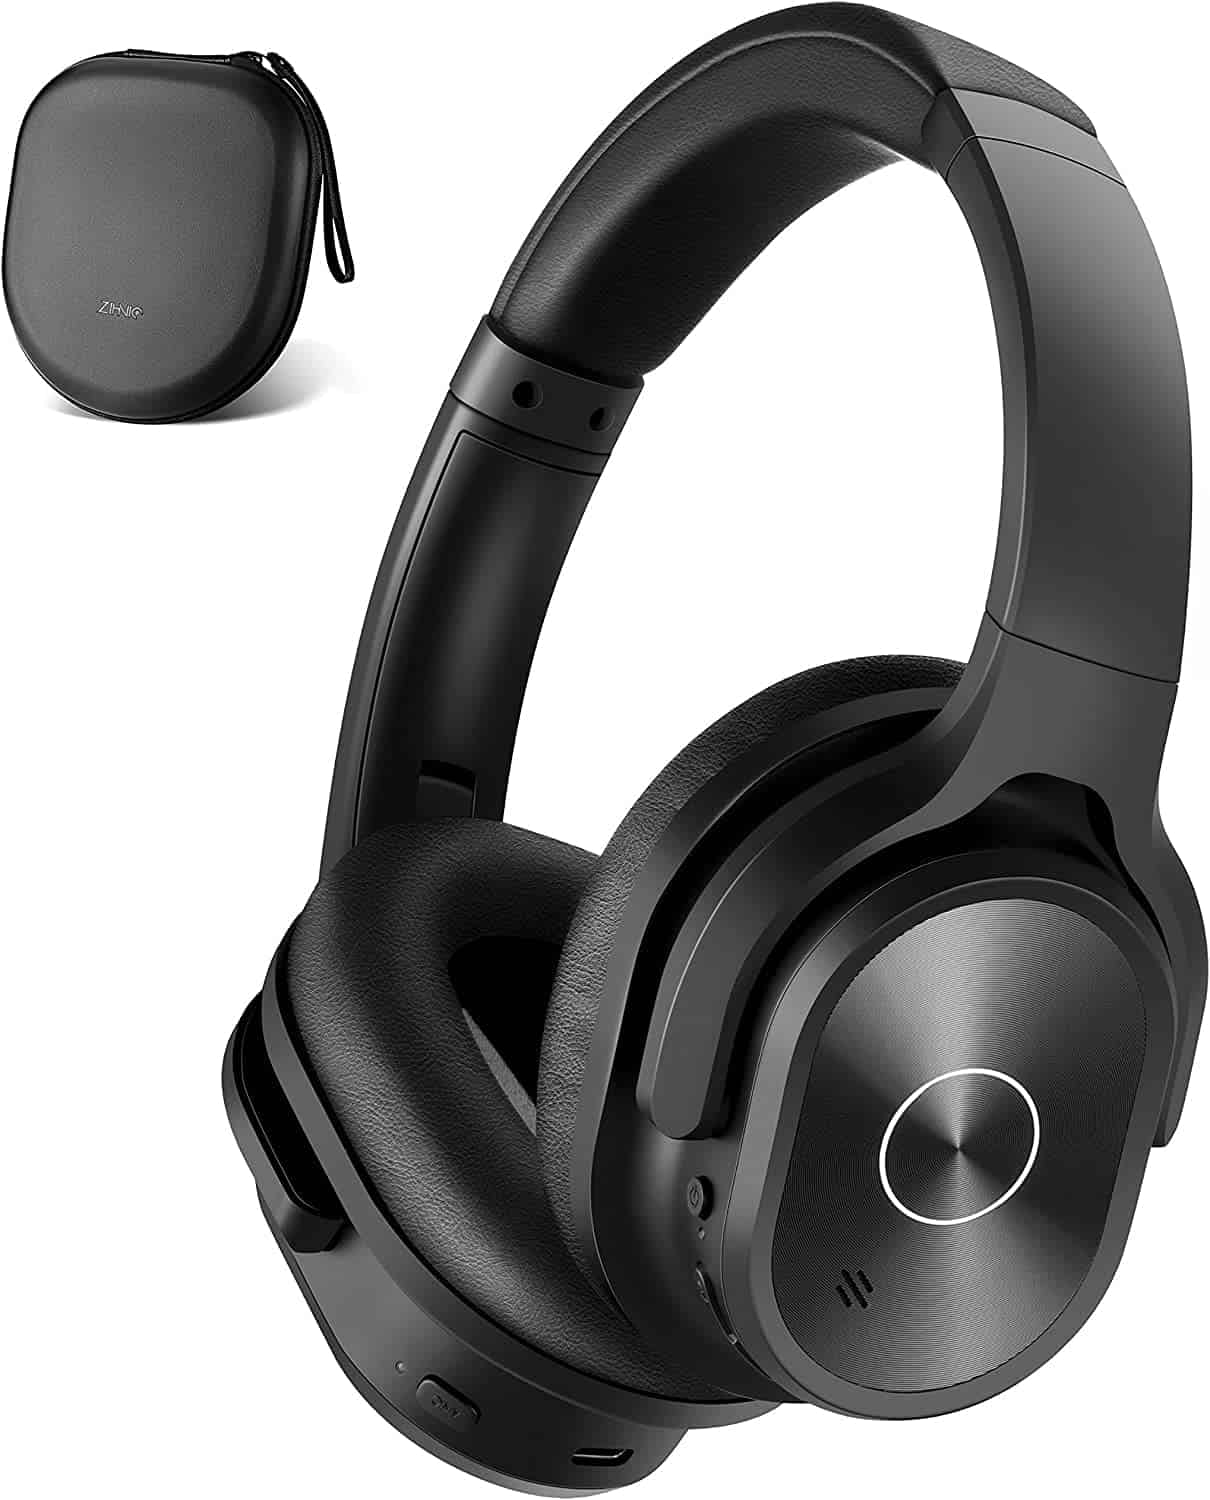 ZIHNIC Active Noise Cancelling Headphones, Gift Ideas for Coworkers